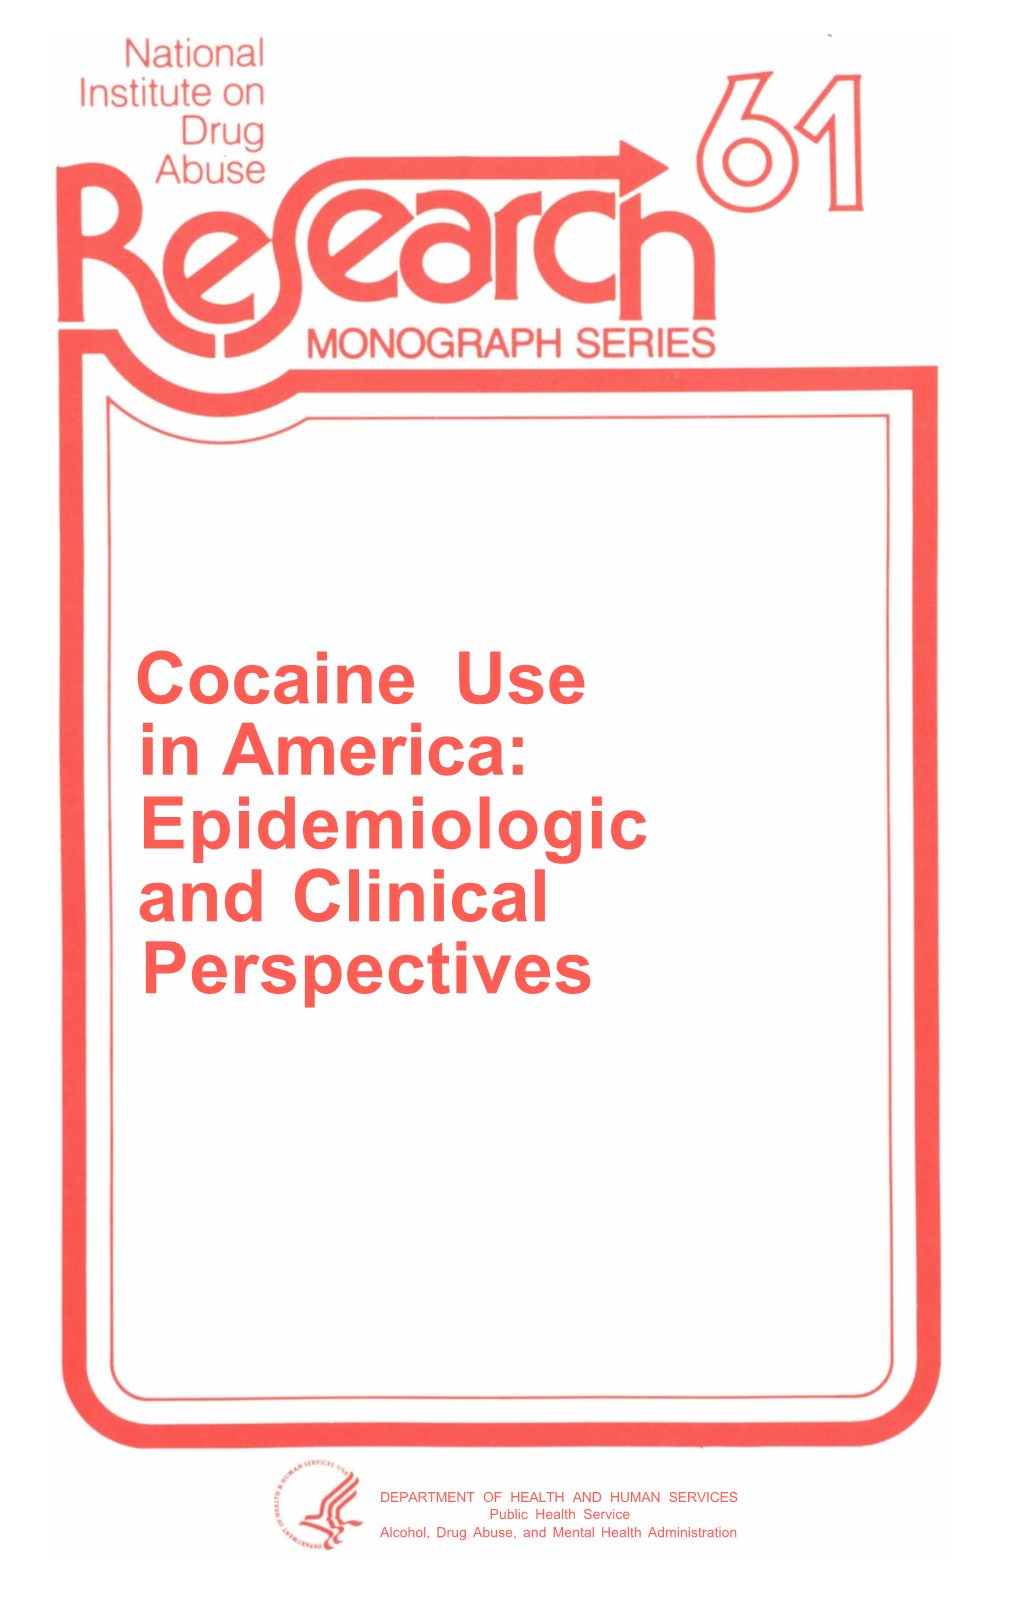 Cocaine Use in America: Epidemiologic and Clinical Perspectives